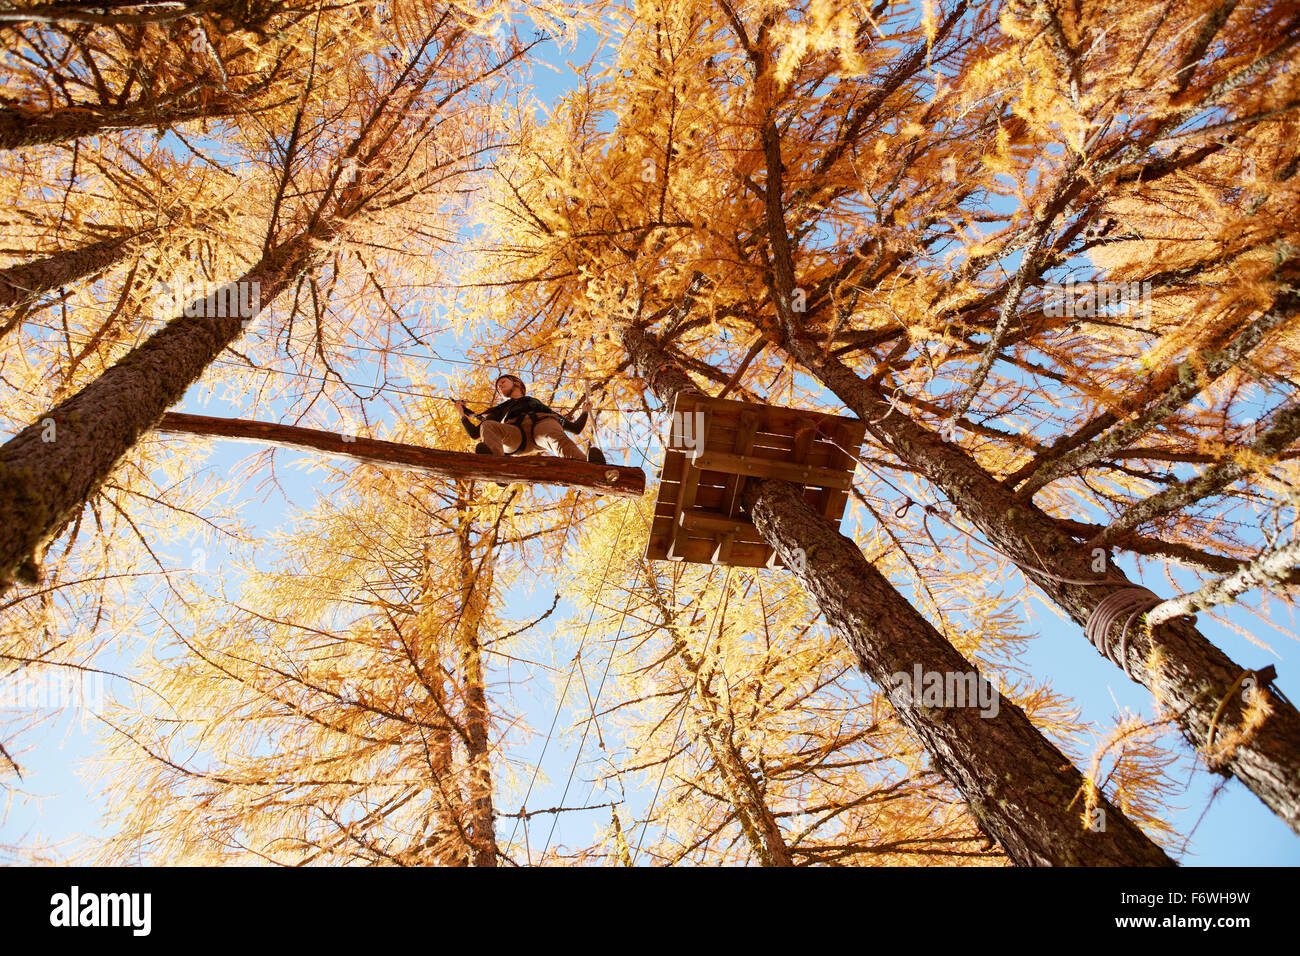 Woman in a high ropes course, Vernagt am See, Schnals Valley, South Tyrol, Italy Stock Photo